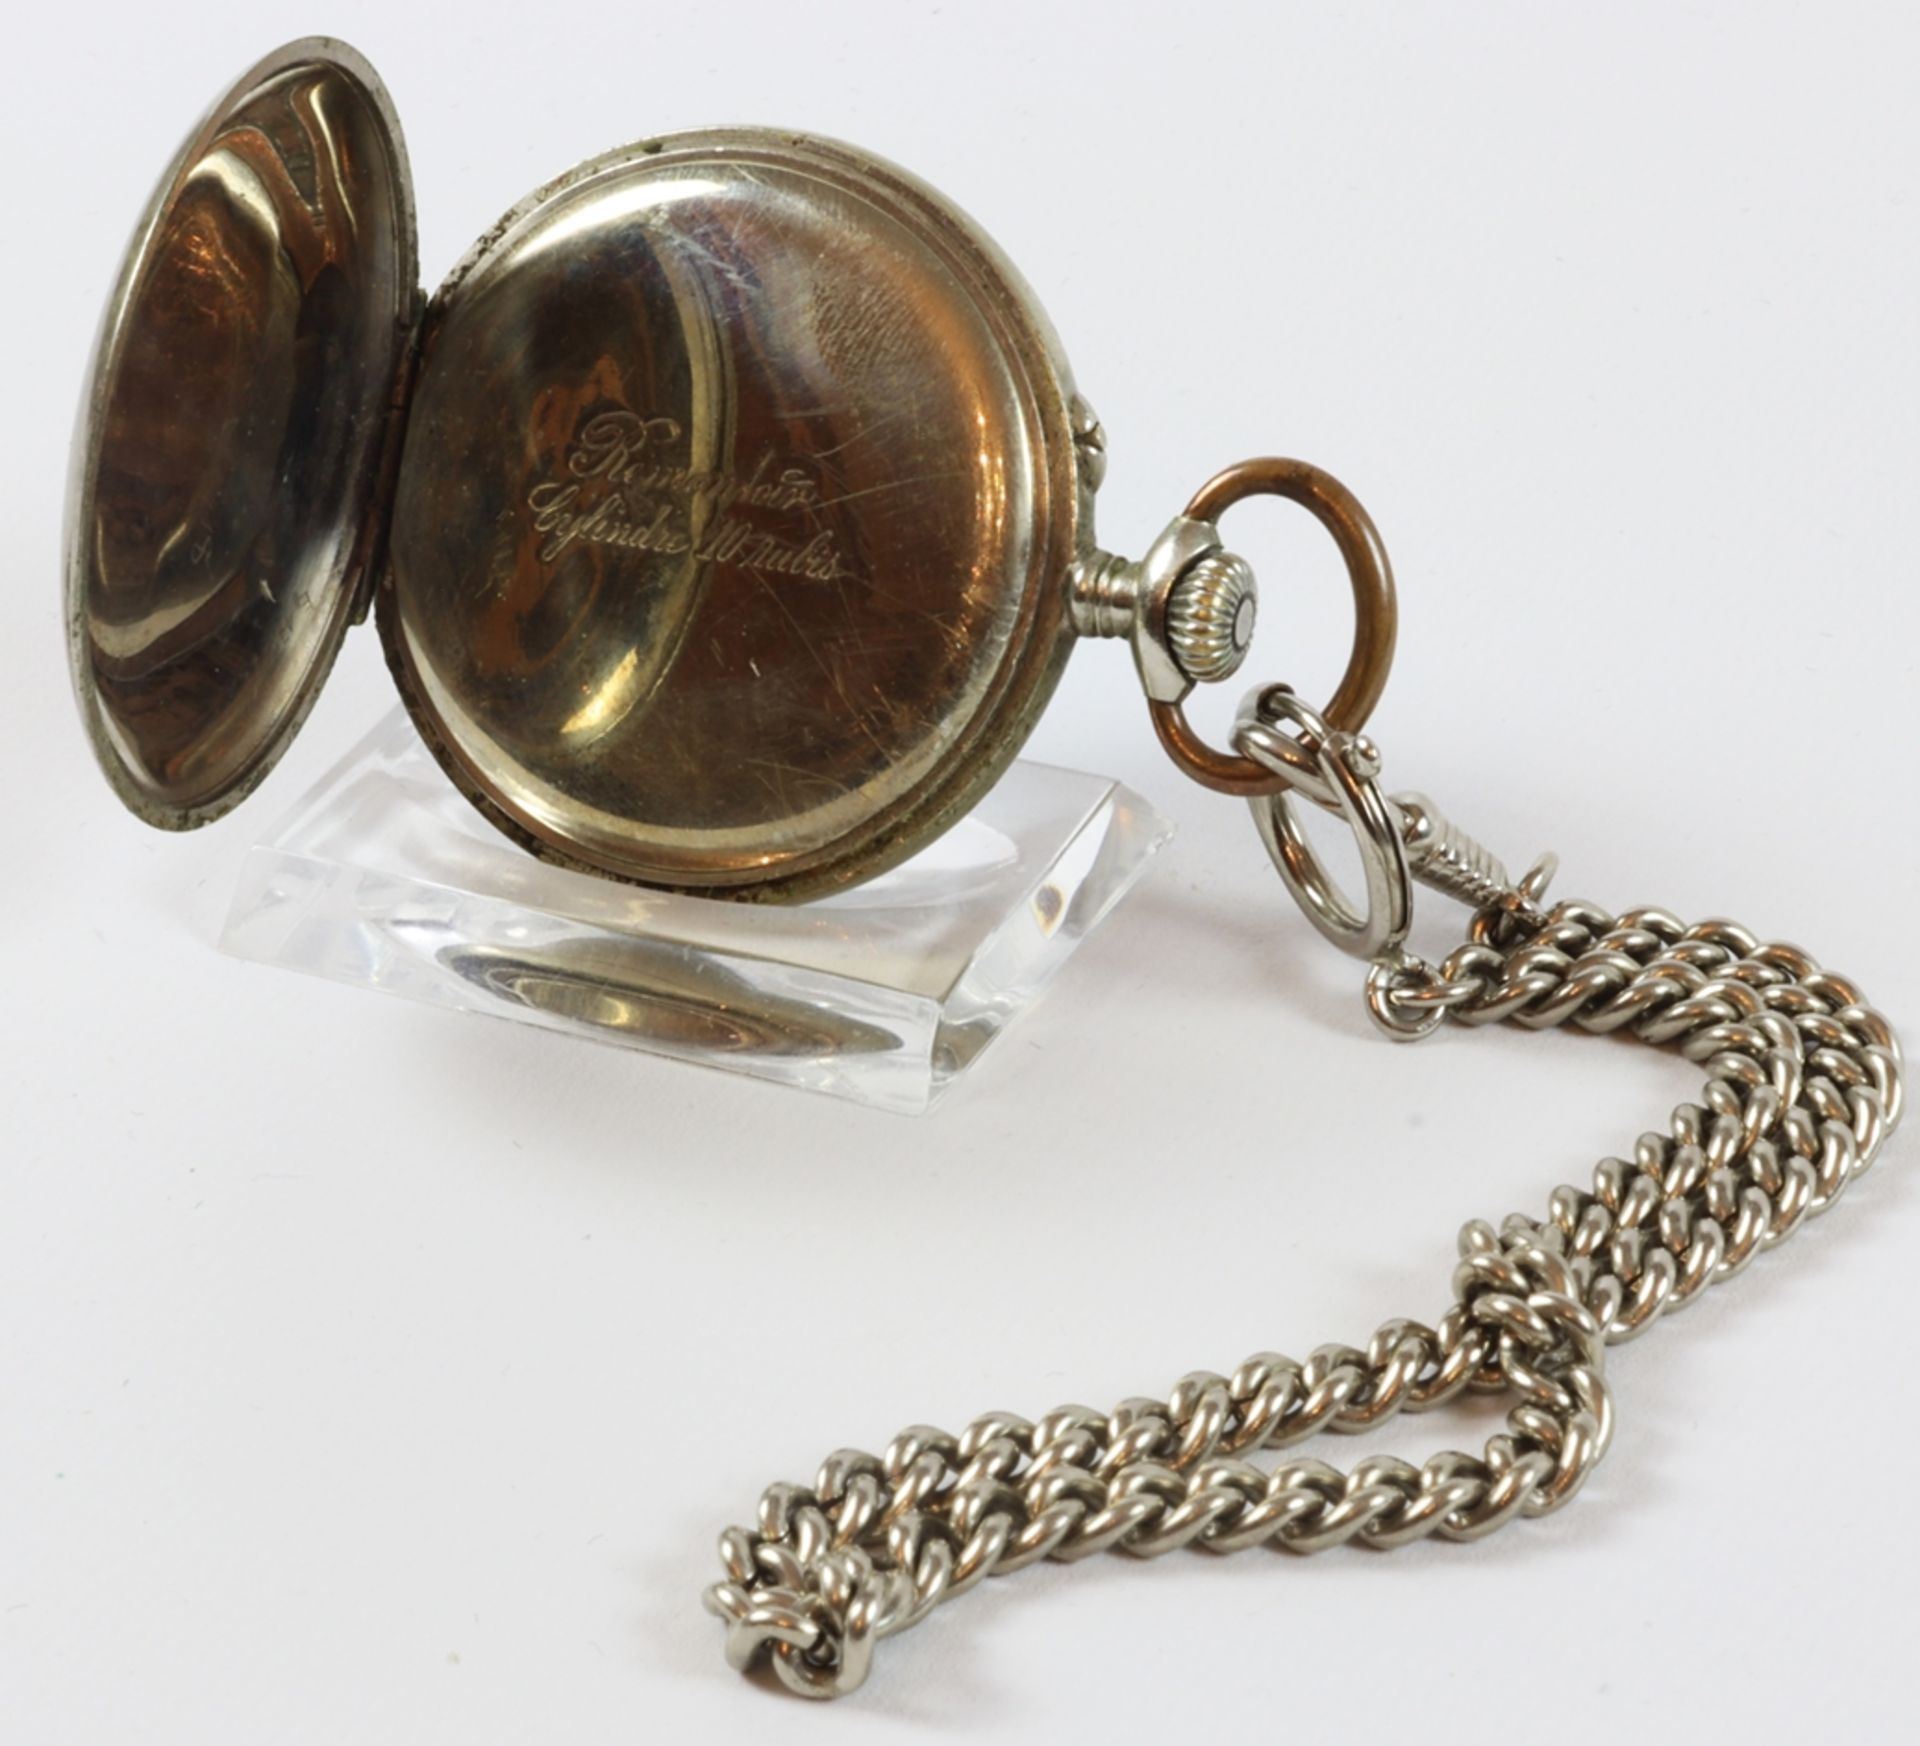 Silver gentleman's pocket watch with chain, historicism 1900 - 1920, German - Image 2 of 4